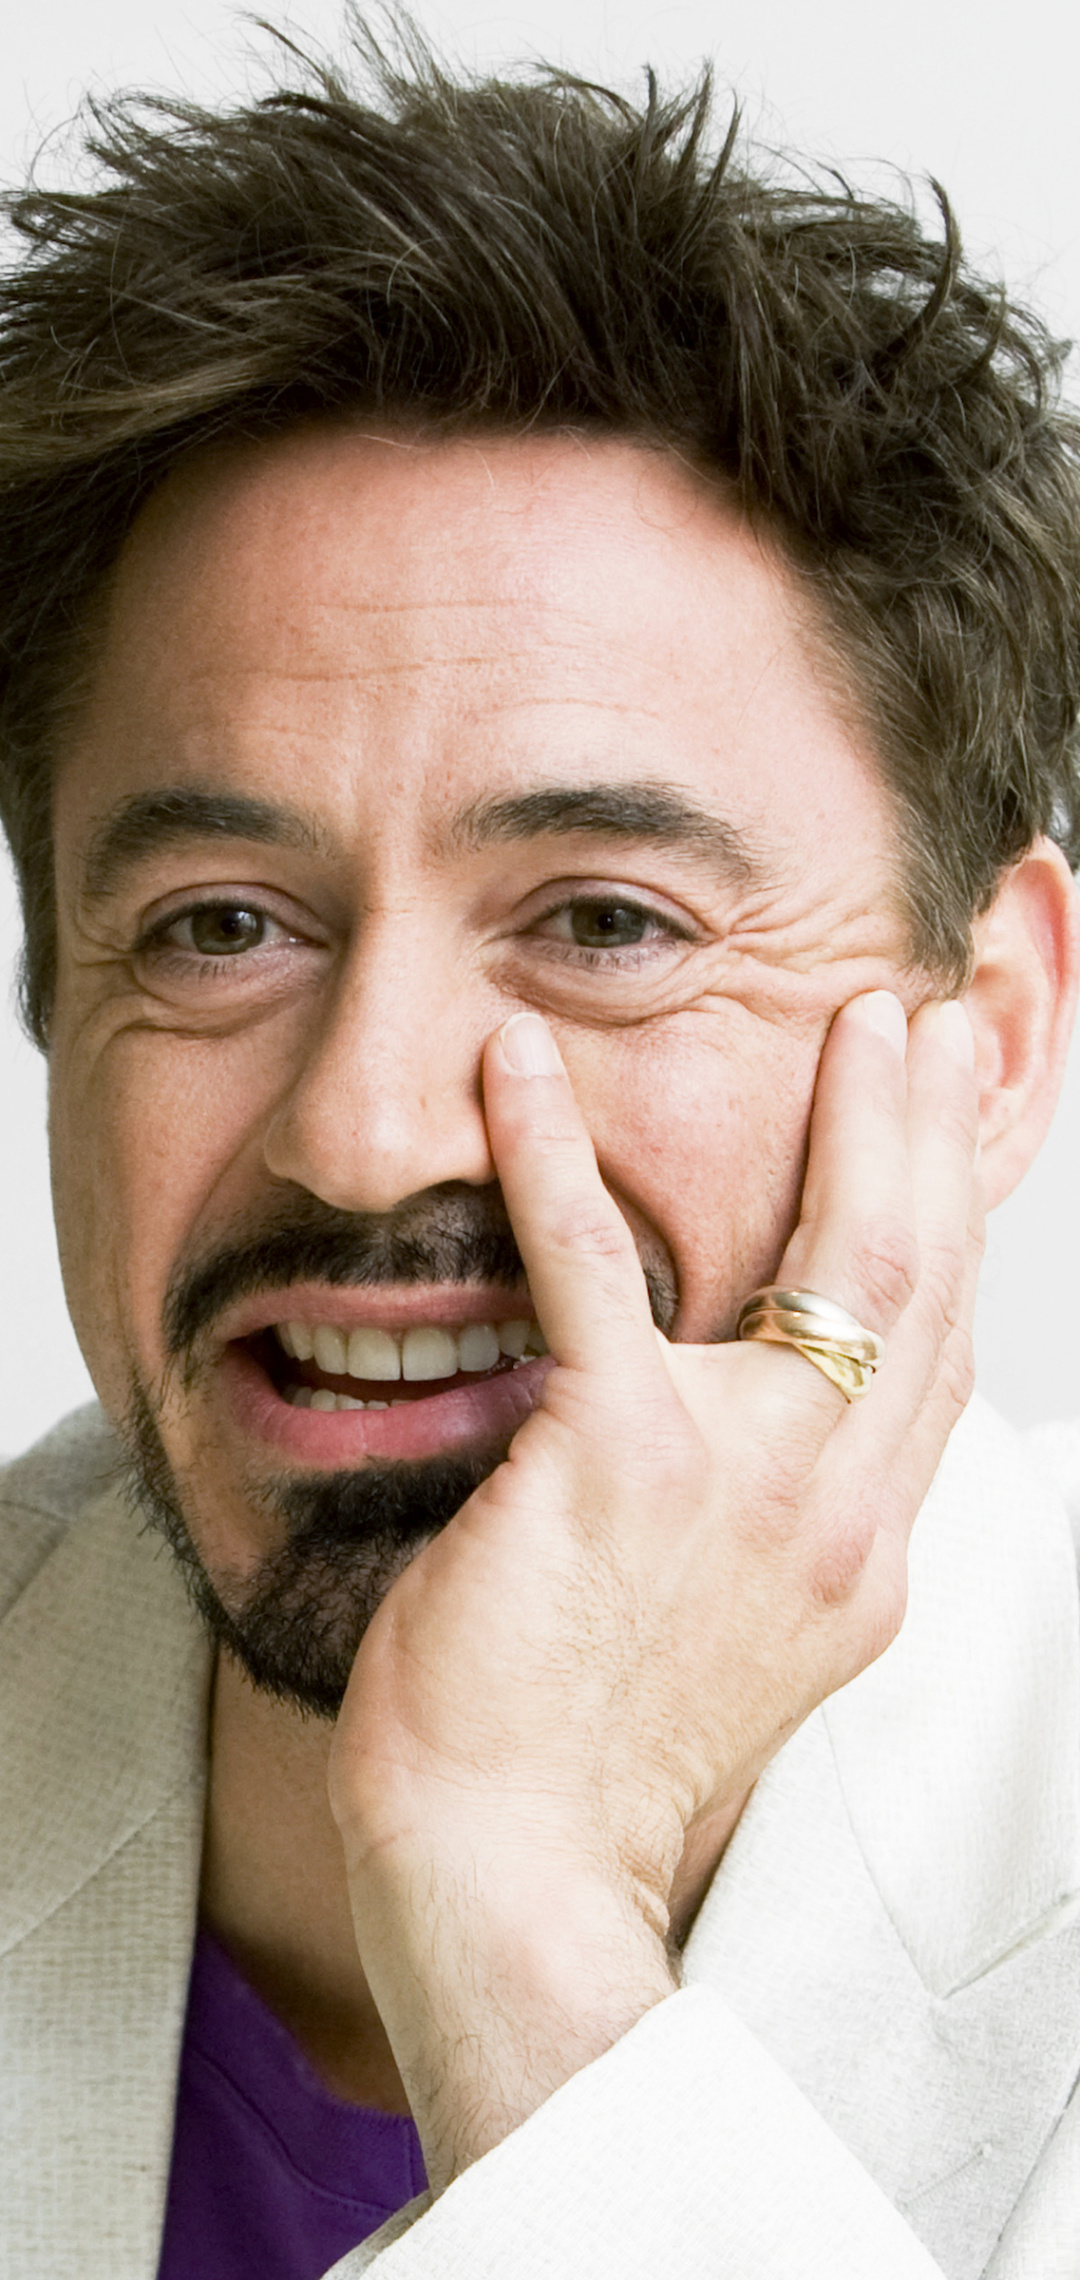 Robert Downey Jr.: Celebrity, One of Hollywood’s most gifted and versatile performers. 1080x2280 HD Wallpaper.